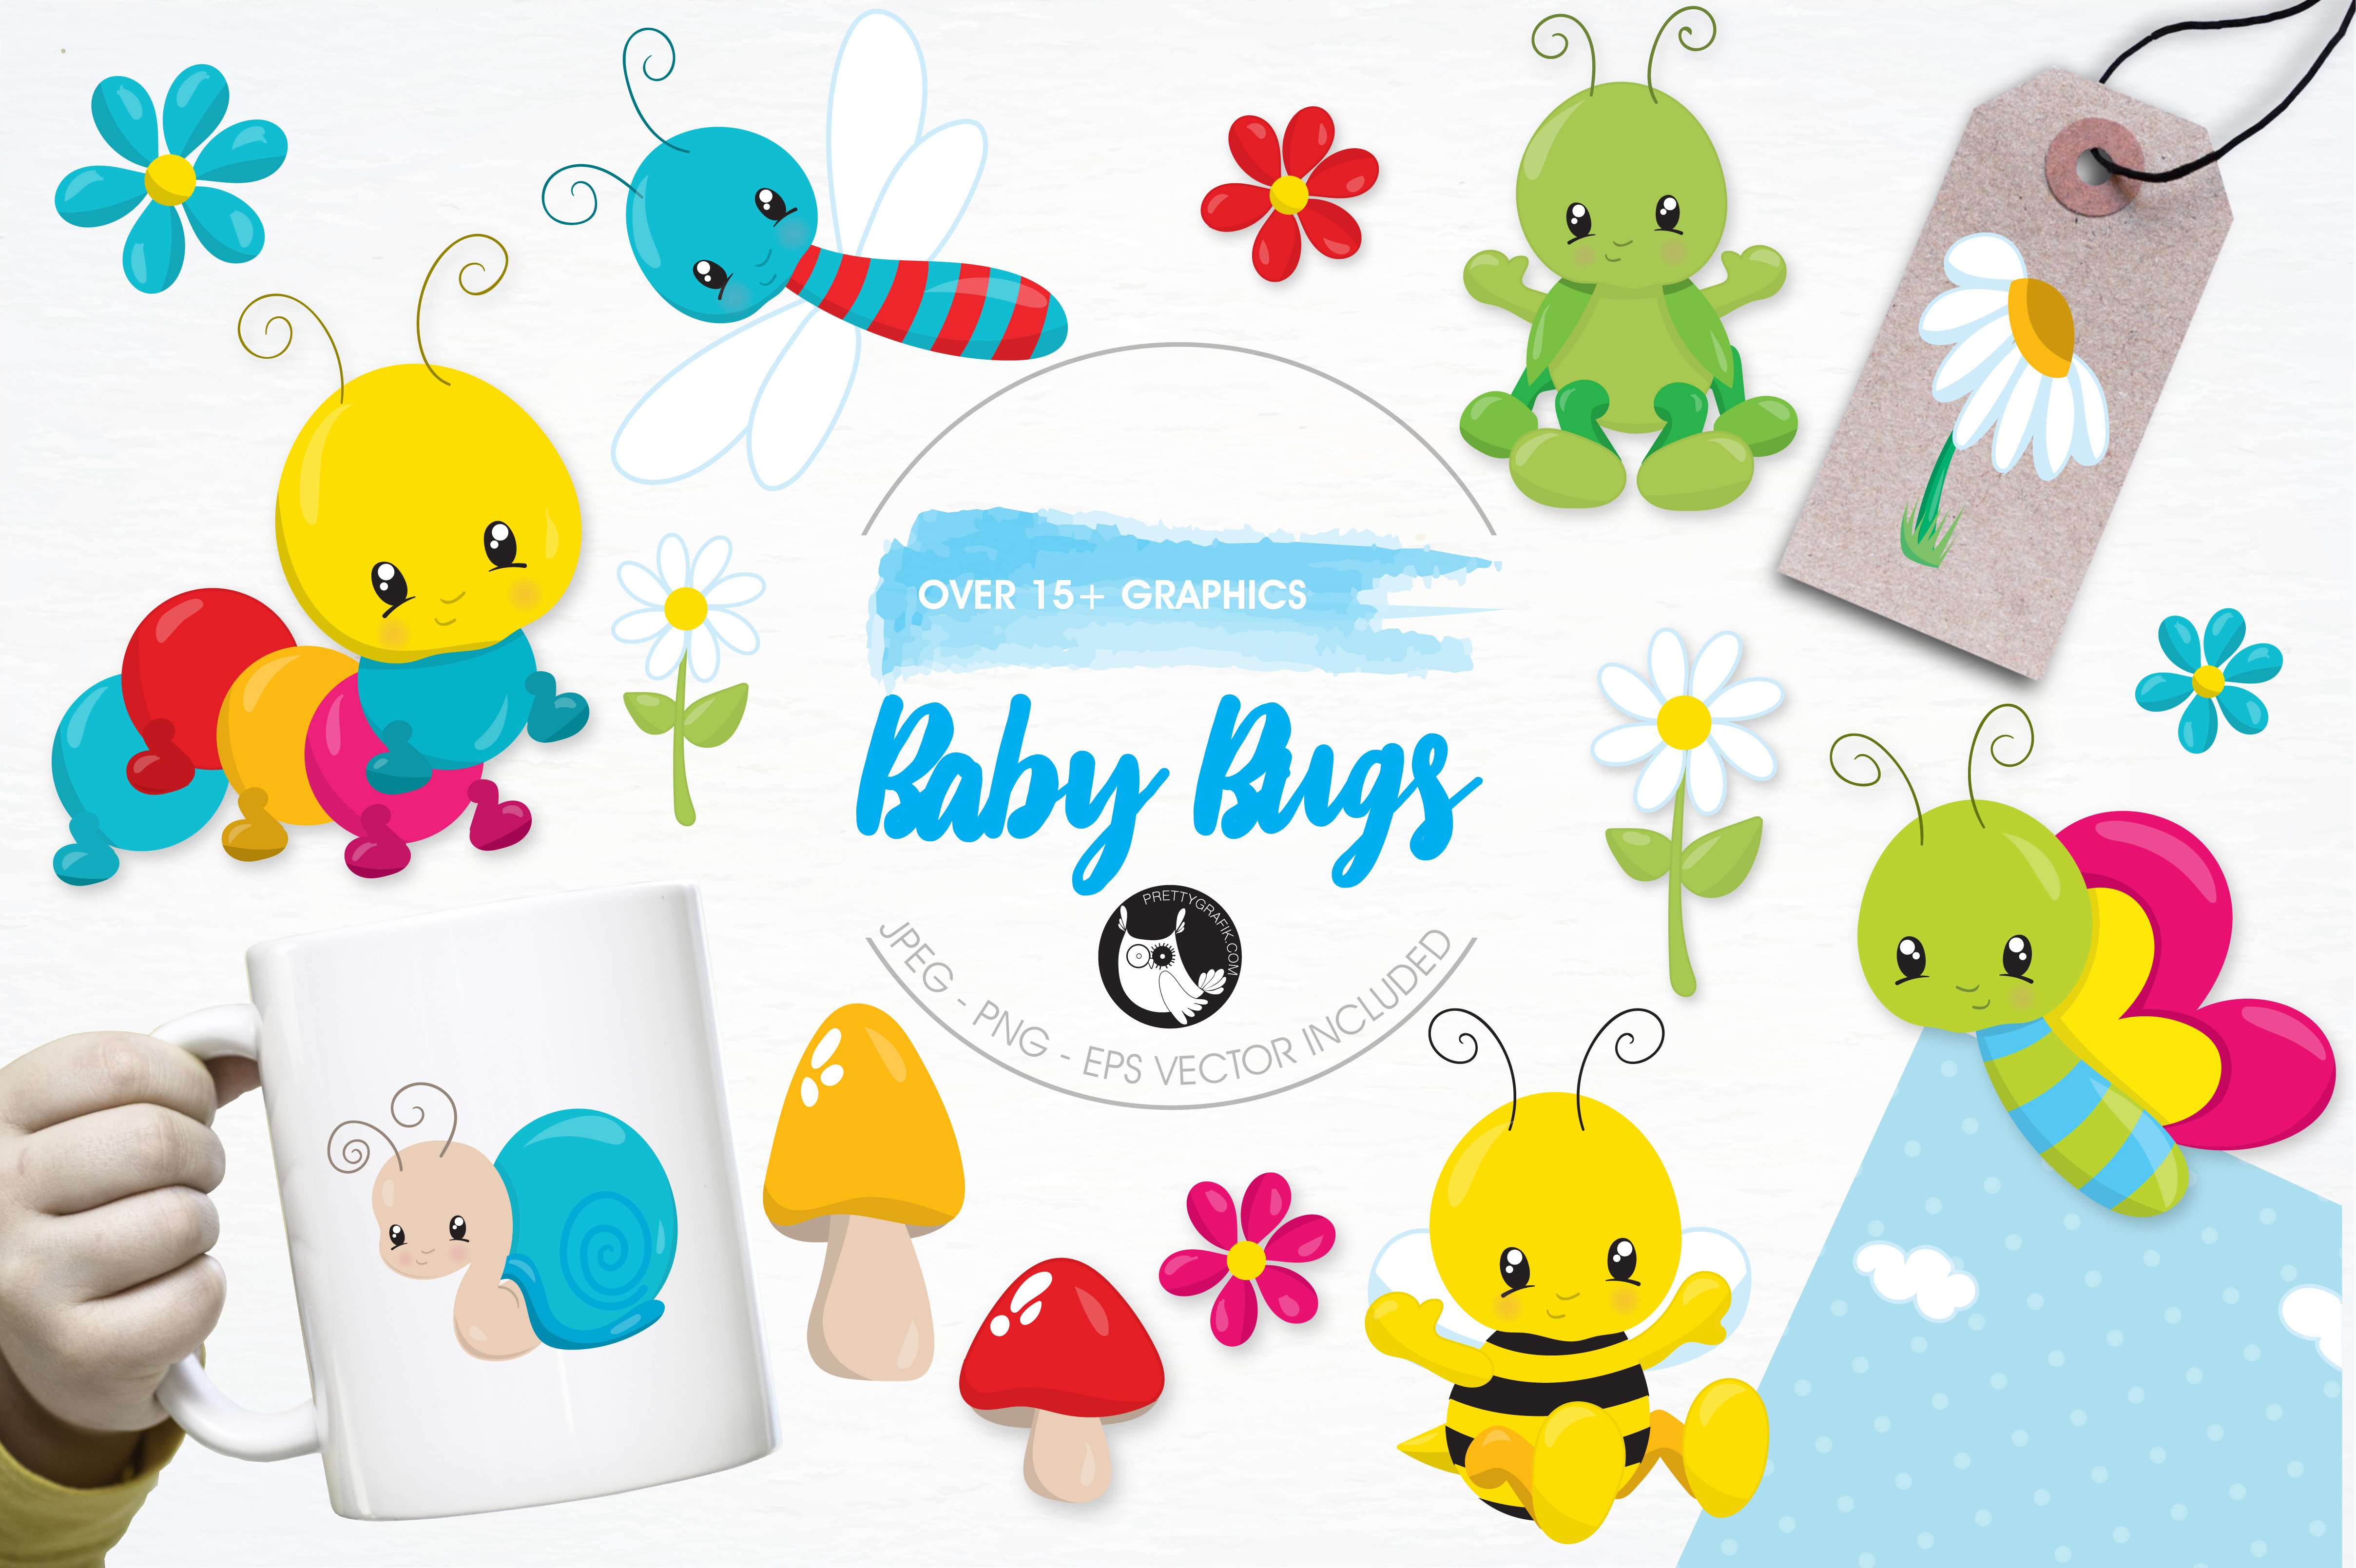 Baby bugs illustration pack - Vector Image